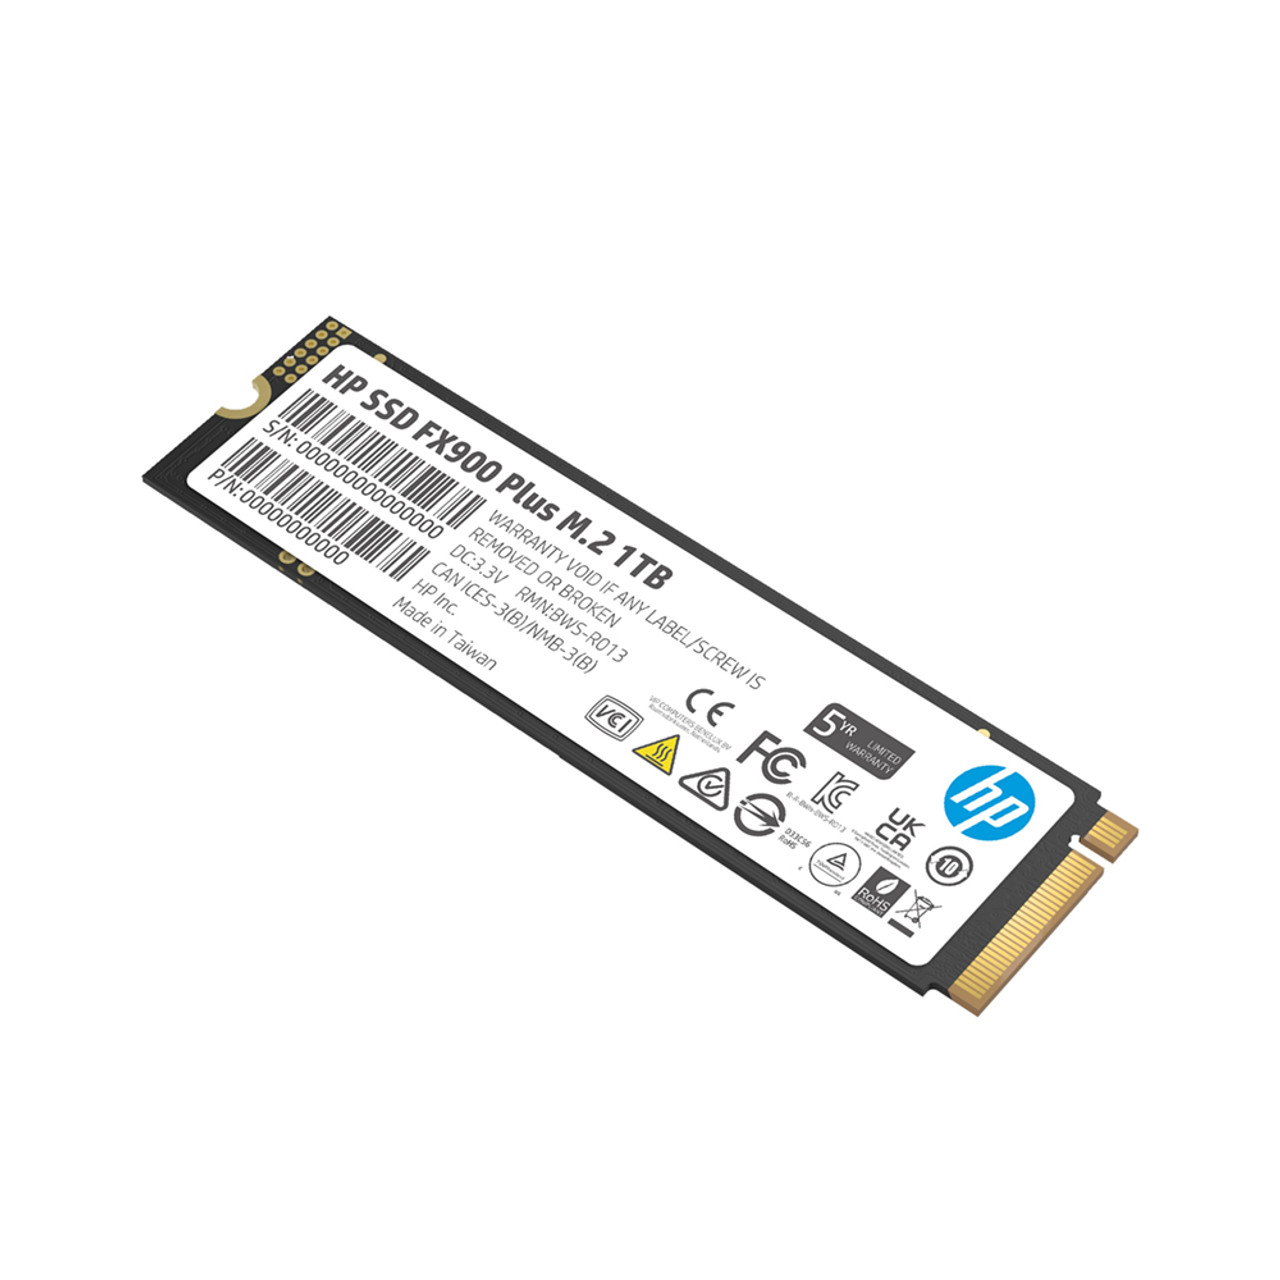 SSD HP FX900 Pro M.2 1To PCIe 4.0 x4 NVMe 1.4